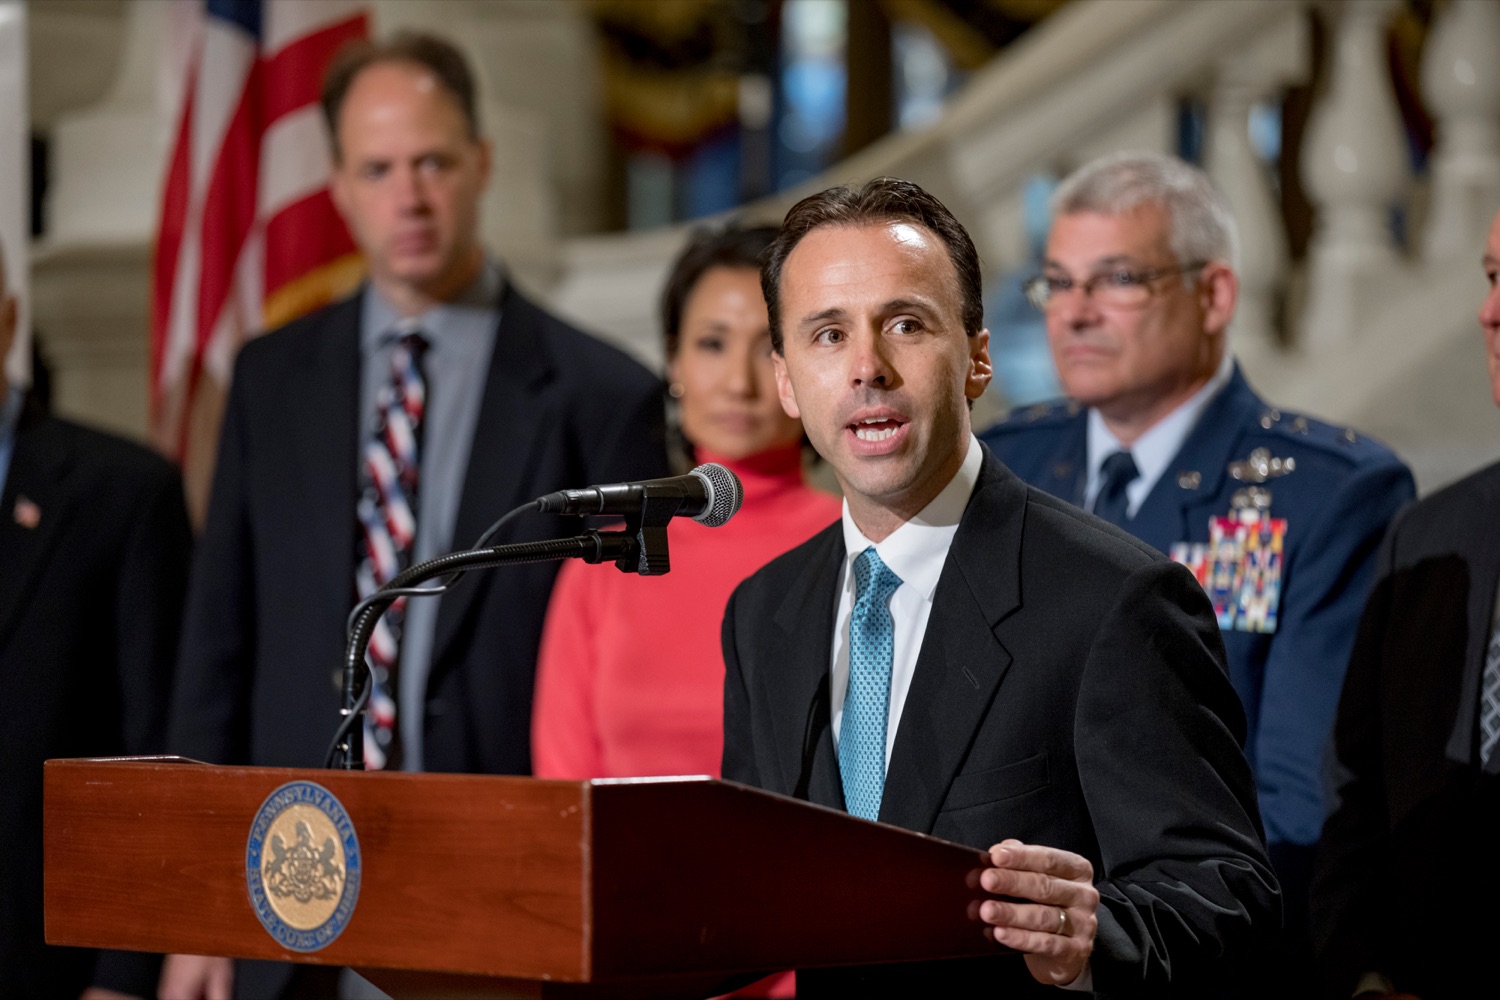 Steve Doster, Pennsylvania State director of Mission:Readiness, speaks during a press conference outlining how competition for qualified individuals among all employment sectors affects military recruiting efforts and warrants greater investment in our next generation inside the Capitol Rotunda on Tuesday, November 12, 2019.<br><a href="https://filesource.amperwave.net/commonwealthofpa/photo/17588_GOV_Mission_Readiness_NK_006.JPG" target="_blank">⇣ Download Photo</a>